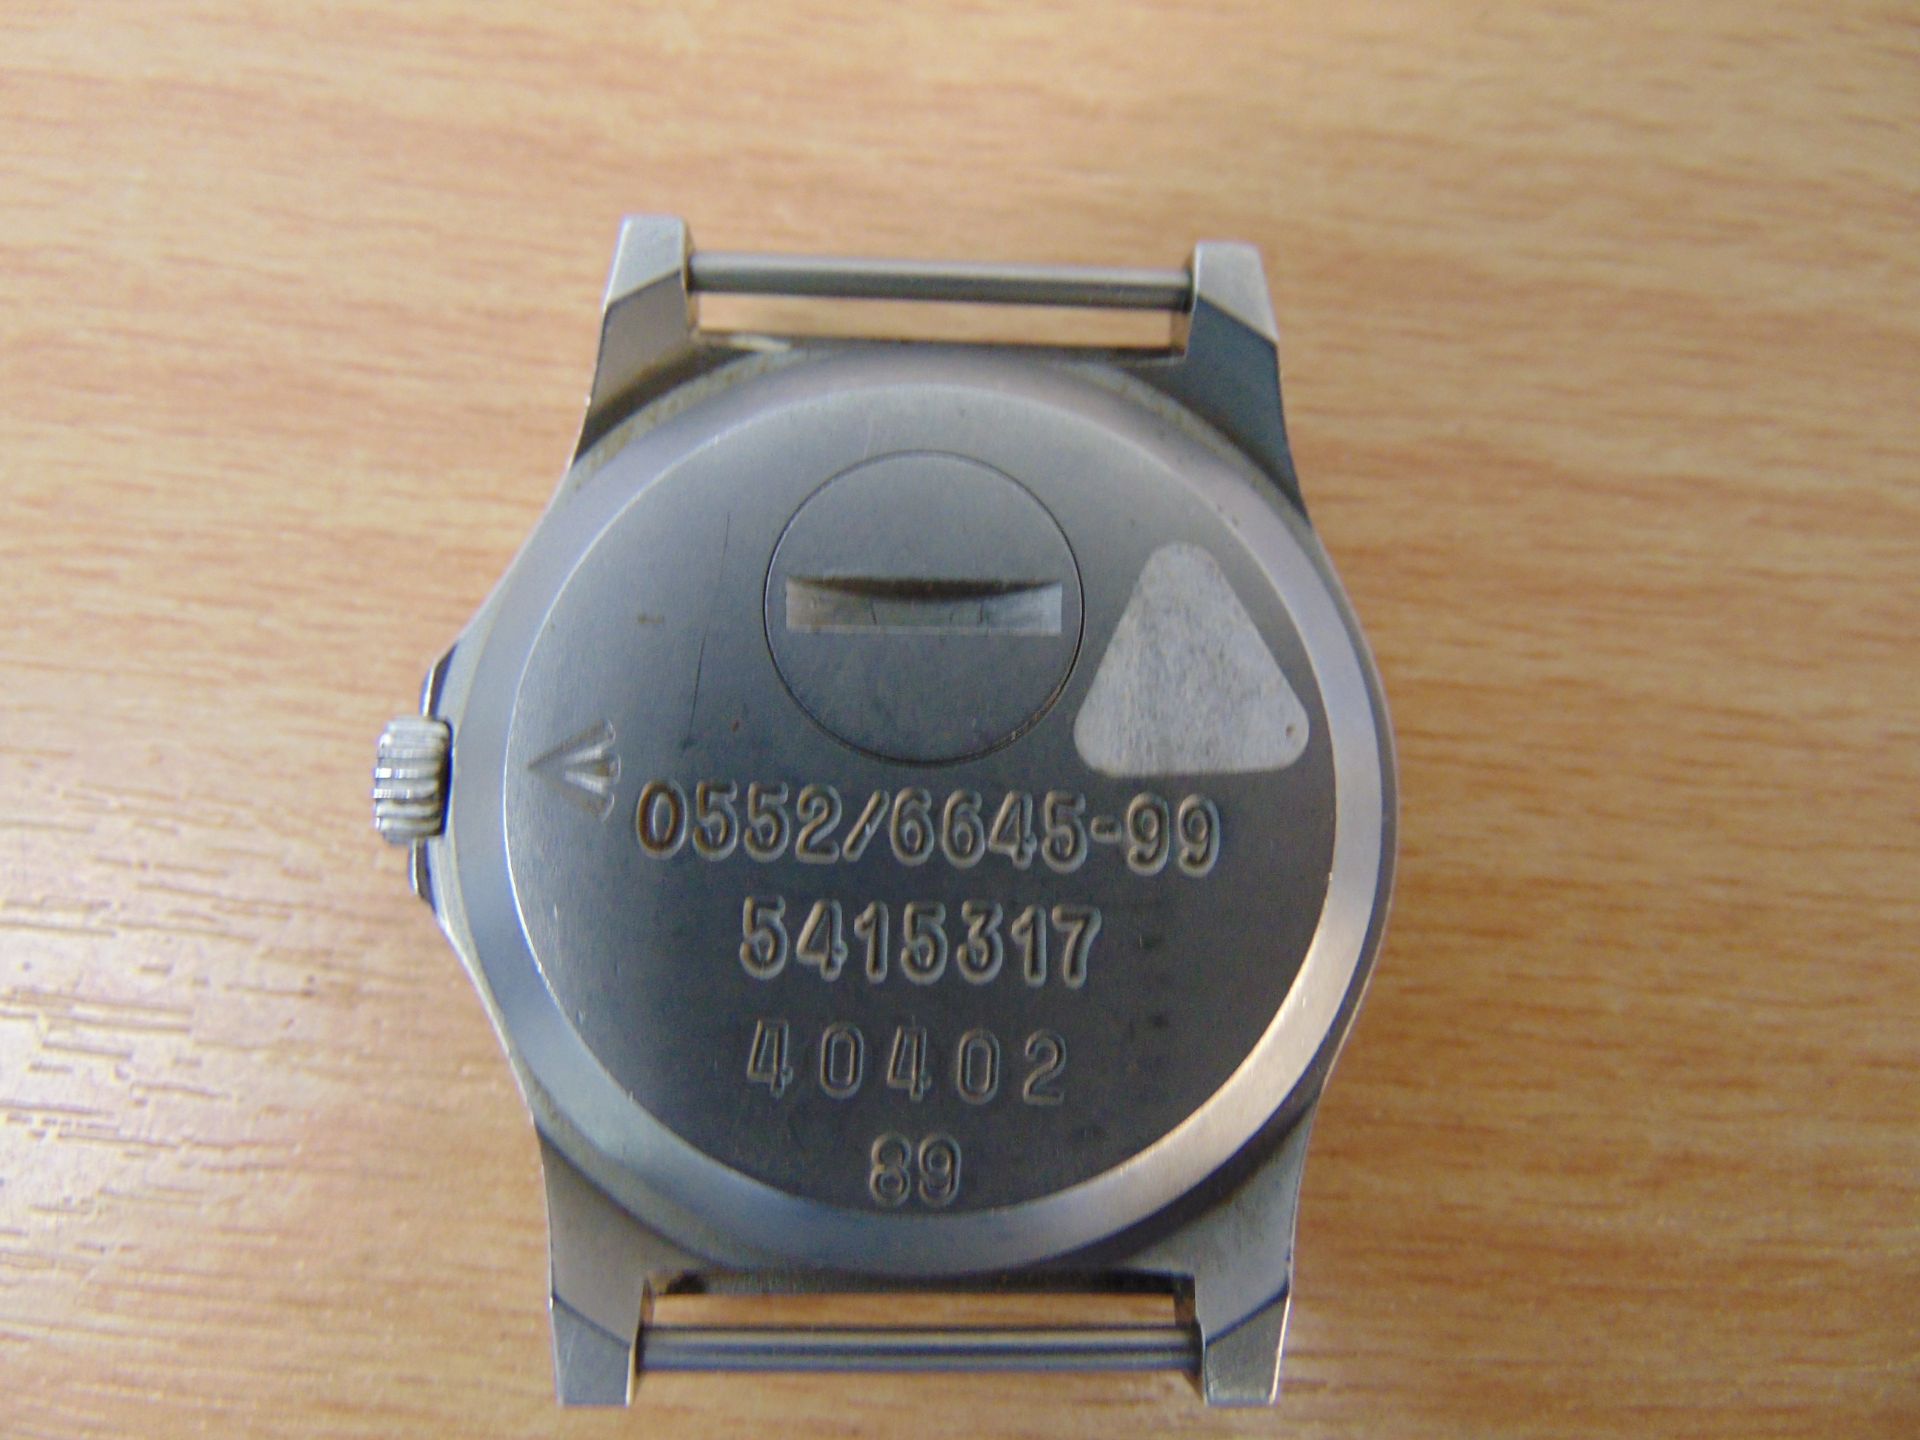 Nice 0552 CWC Navy / R Marines Issue Service Watch Nato Marks, Date 1989 GULF WAR - Image 2 of 3